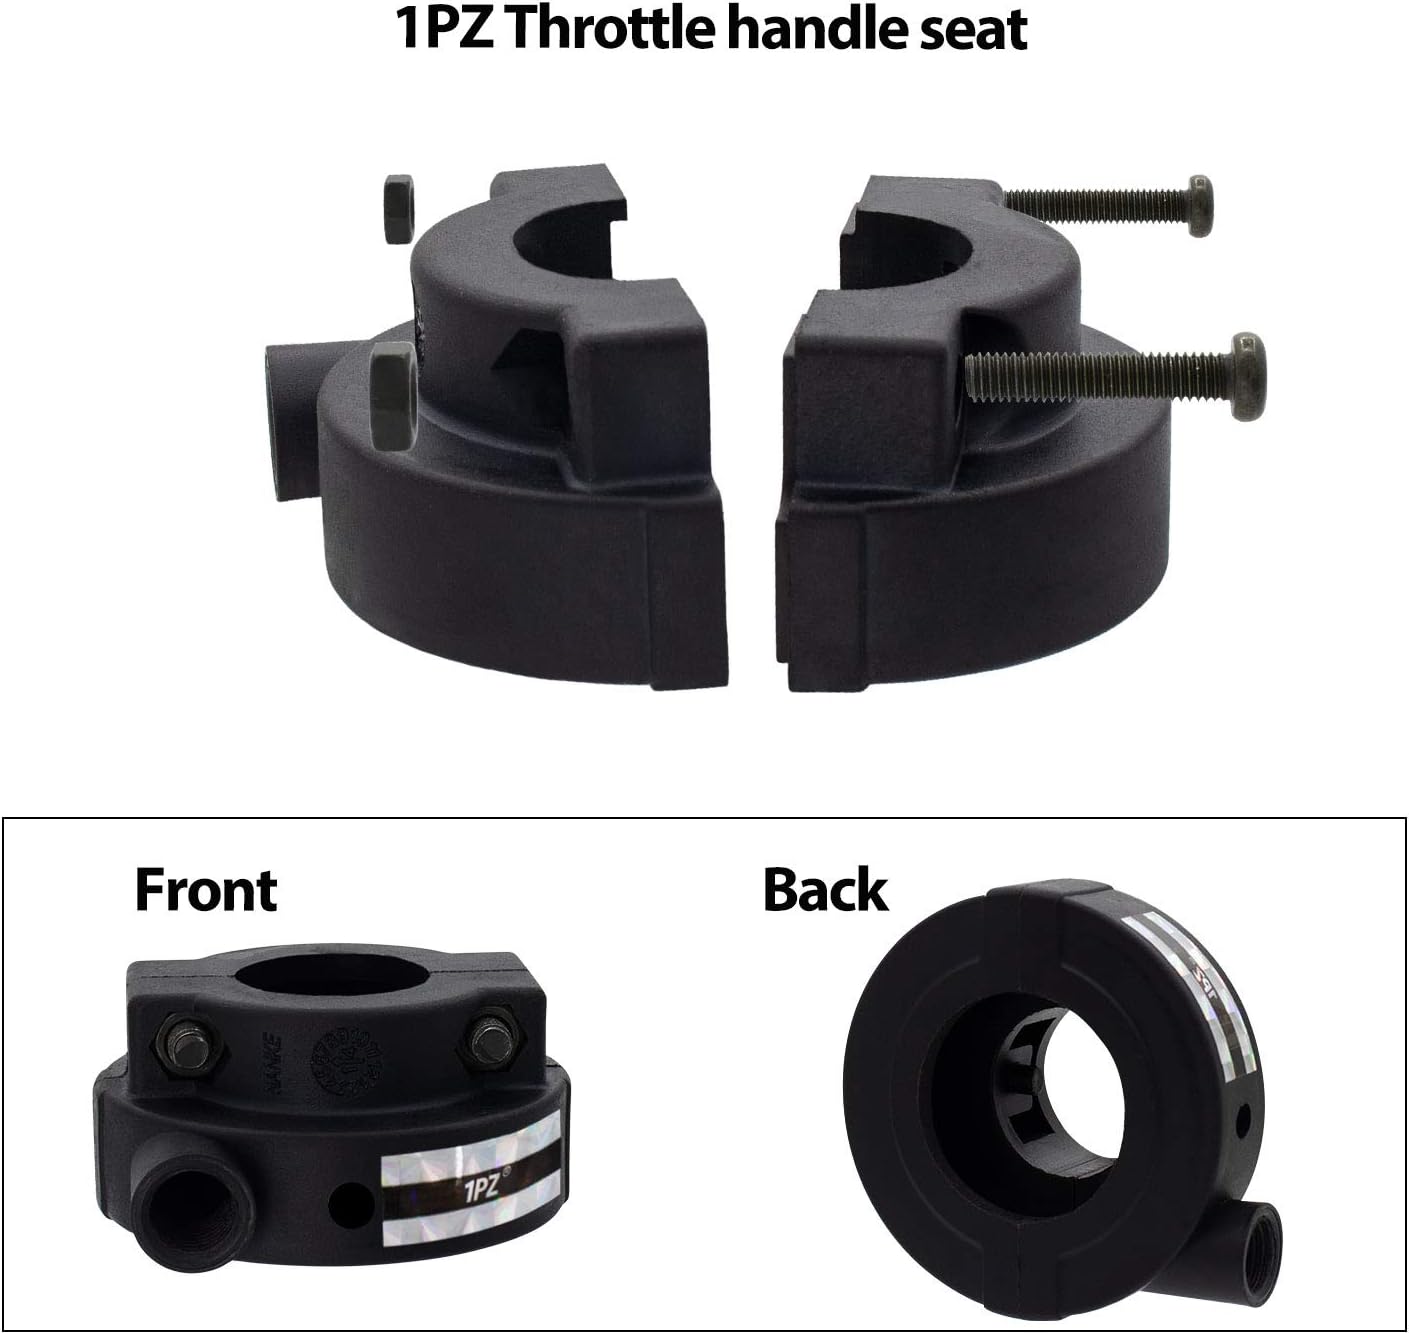 1PZ GS1-S78 Universal Throttle Twist Grip Set with 78" Scooter Throttle Cable for 50cc 80cc 125cc 150cc GY6 4 Stroke Scooter Motorcycle Moped ATV